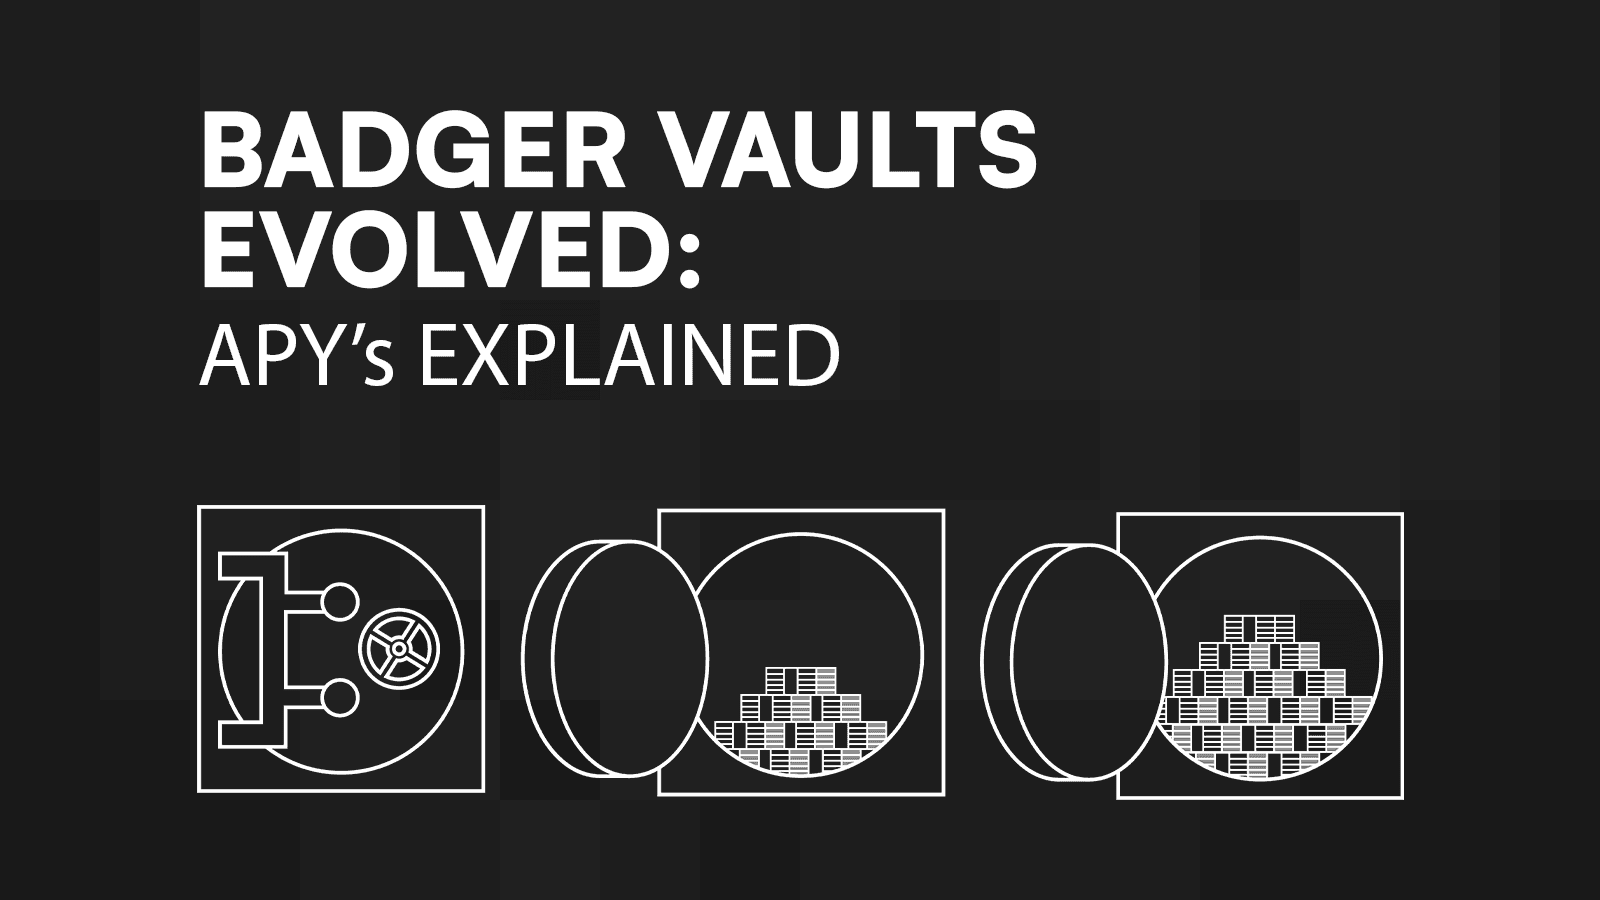 Badger Vaults Evolved: APY's Explained